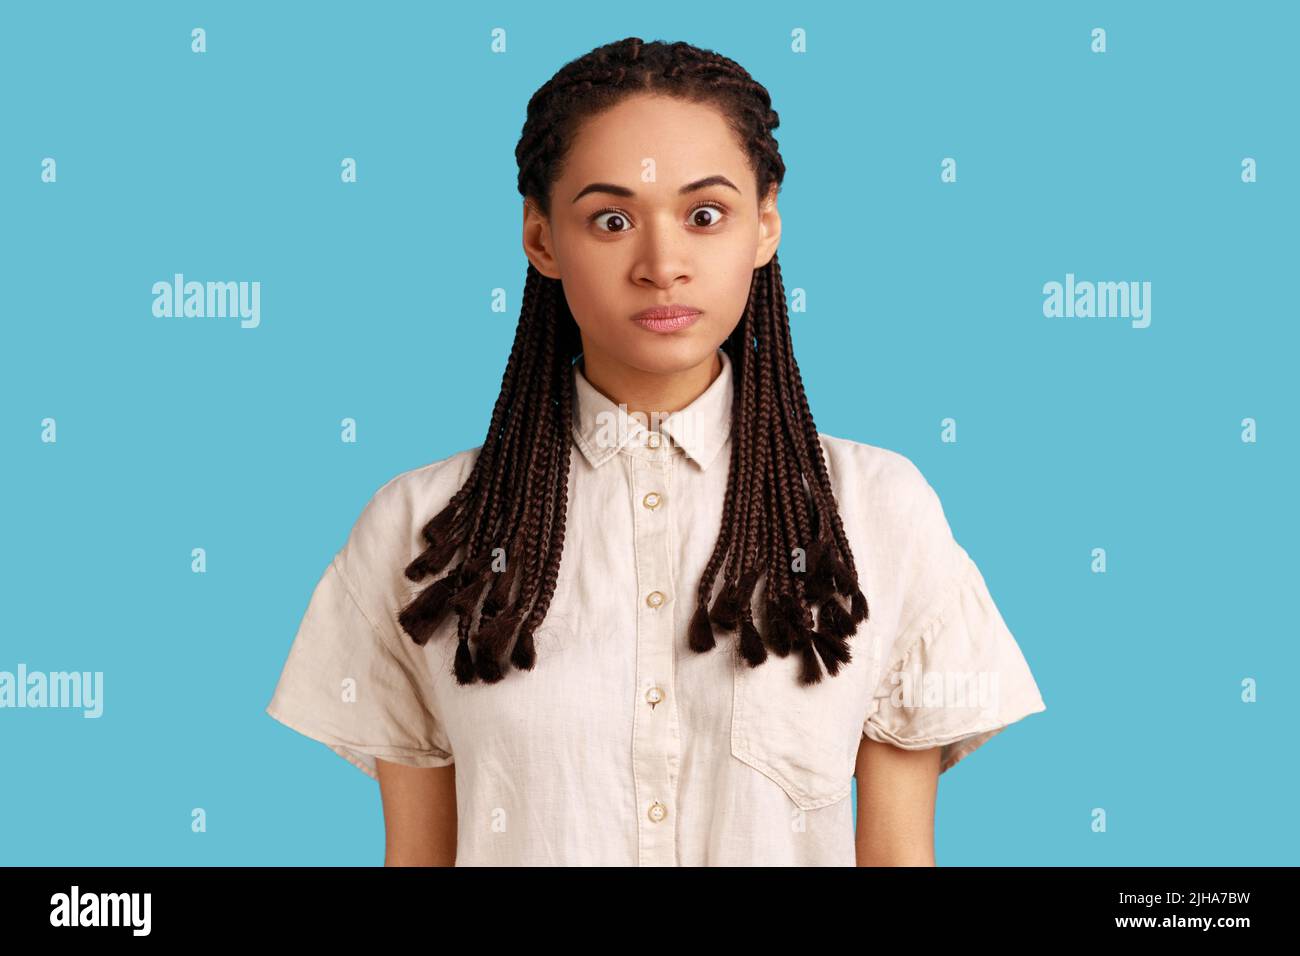 Portrait of funny silly woman with black dreadlocks looking at camera, cross eyed with stupid dumb face, has awkward confused comical expression. Indoor studio shot isolated on blue background. Stock Photo